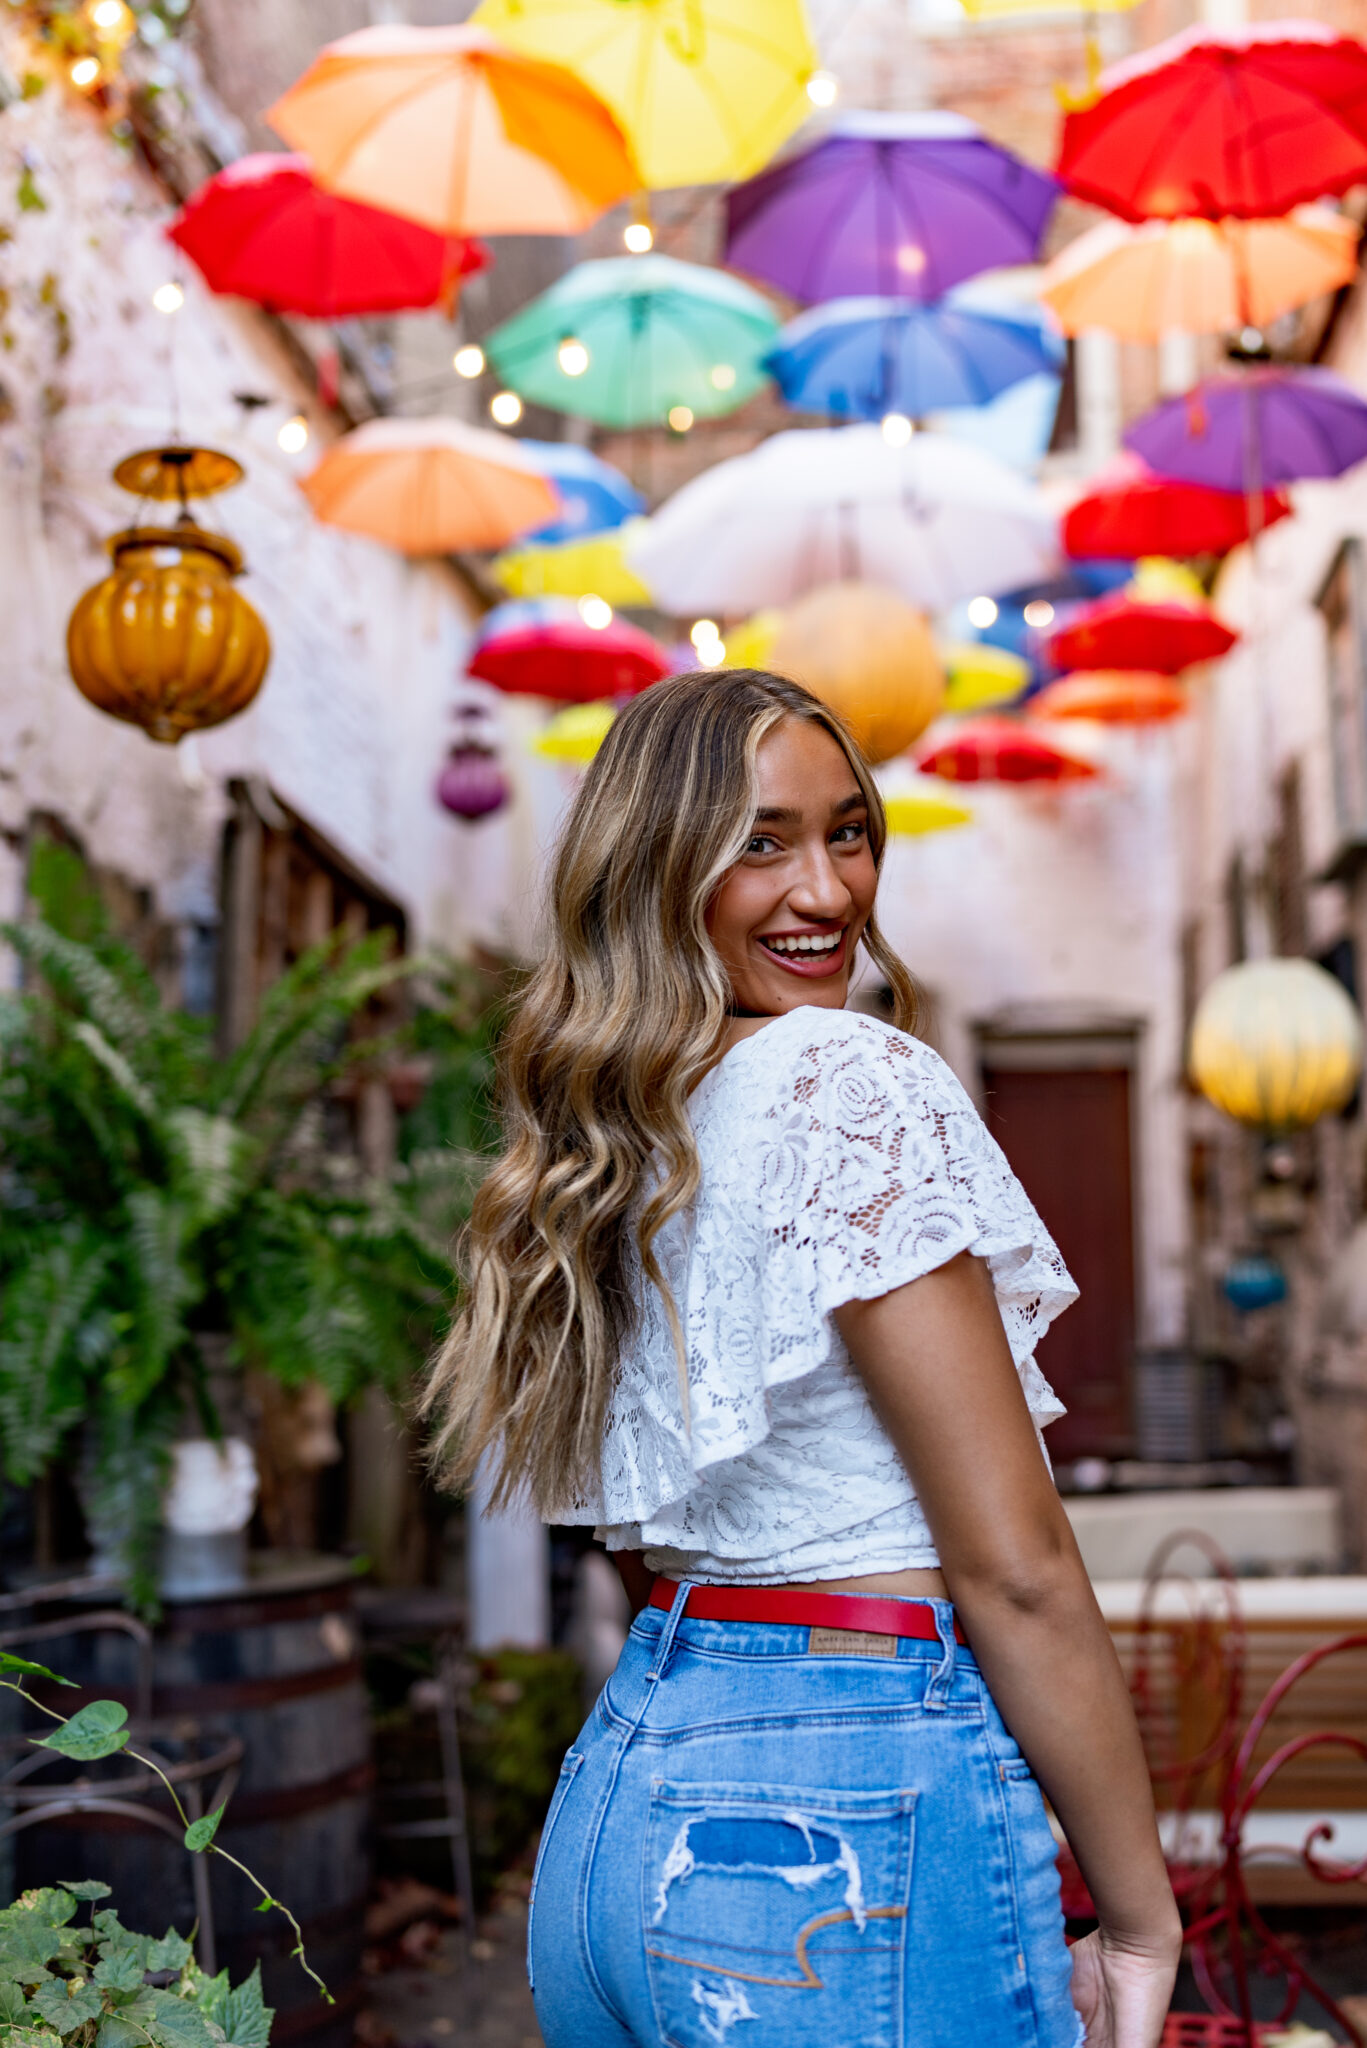 A girl wearing a white top and blue jeans looks over her shoulder with colorful umbrellas above her